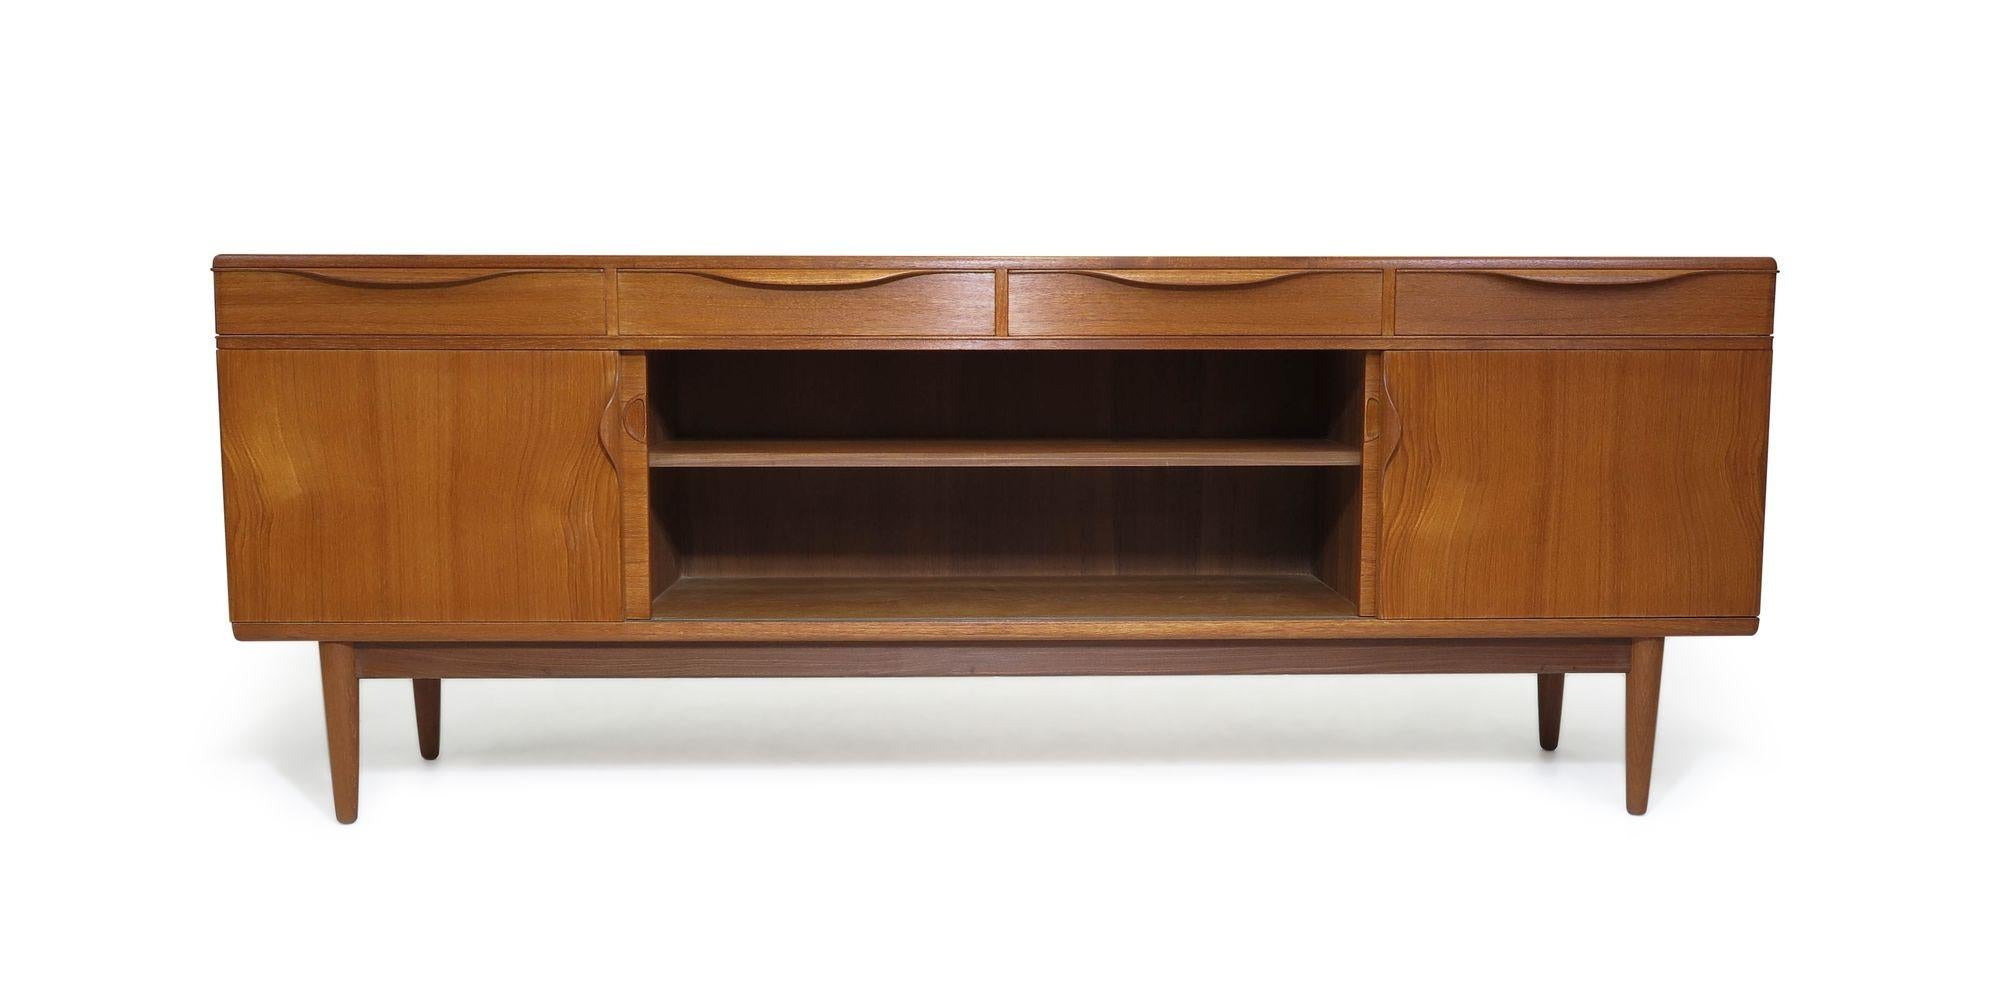 Mid-century teak credenza designed by Johannes Andersen, Denmark, 1960s. The sideboard is handcrafted of book-matched old-growth teak with four sliding cabinet doors below four drawers; each with sculptural pulls. The doors open to reveal an